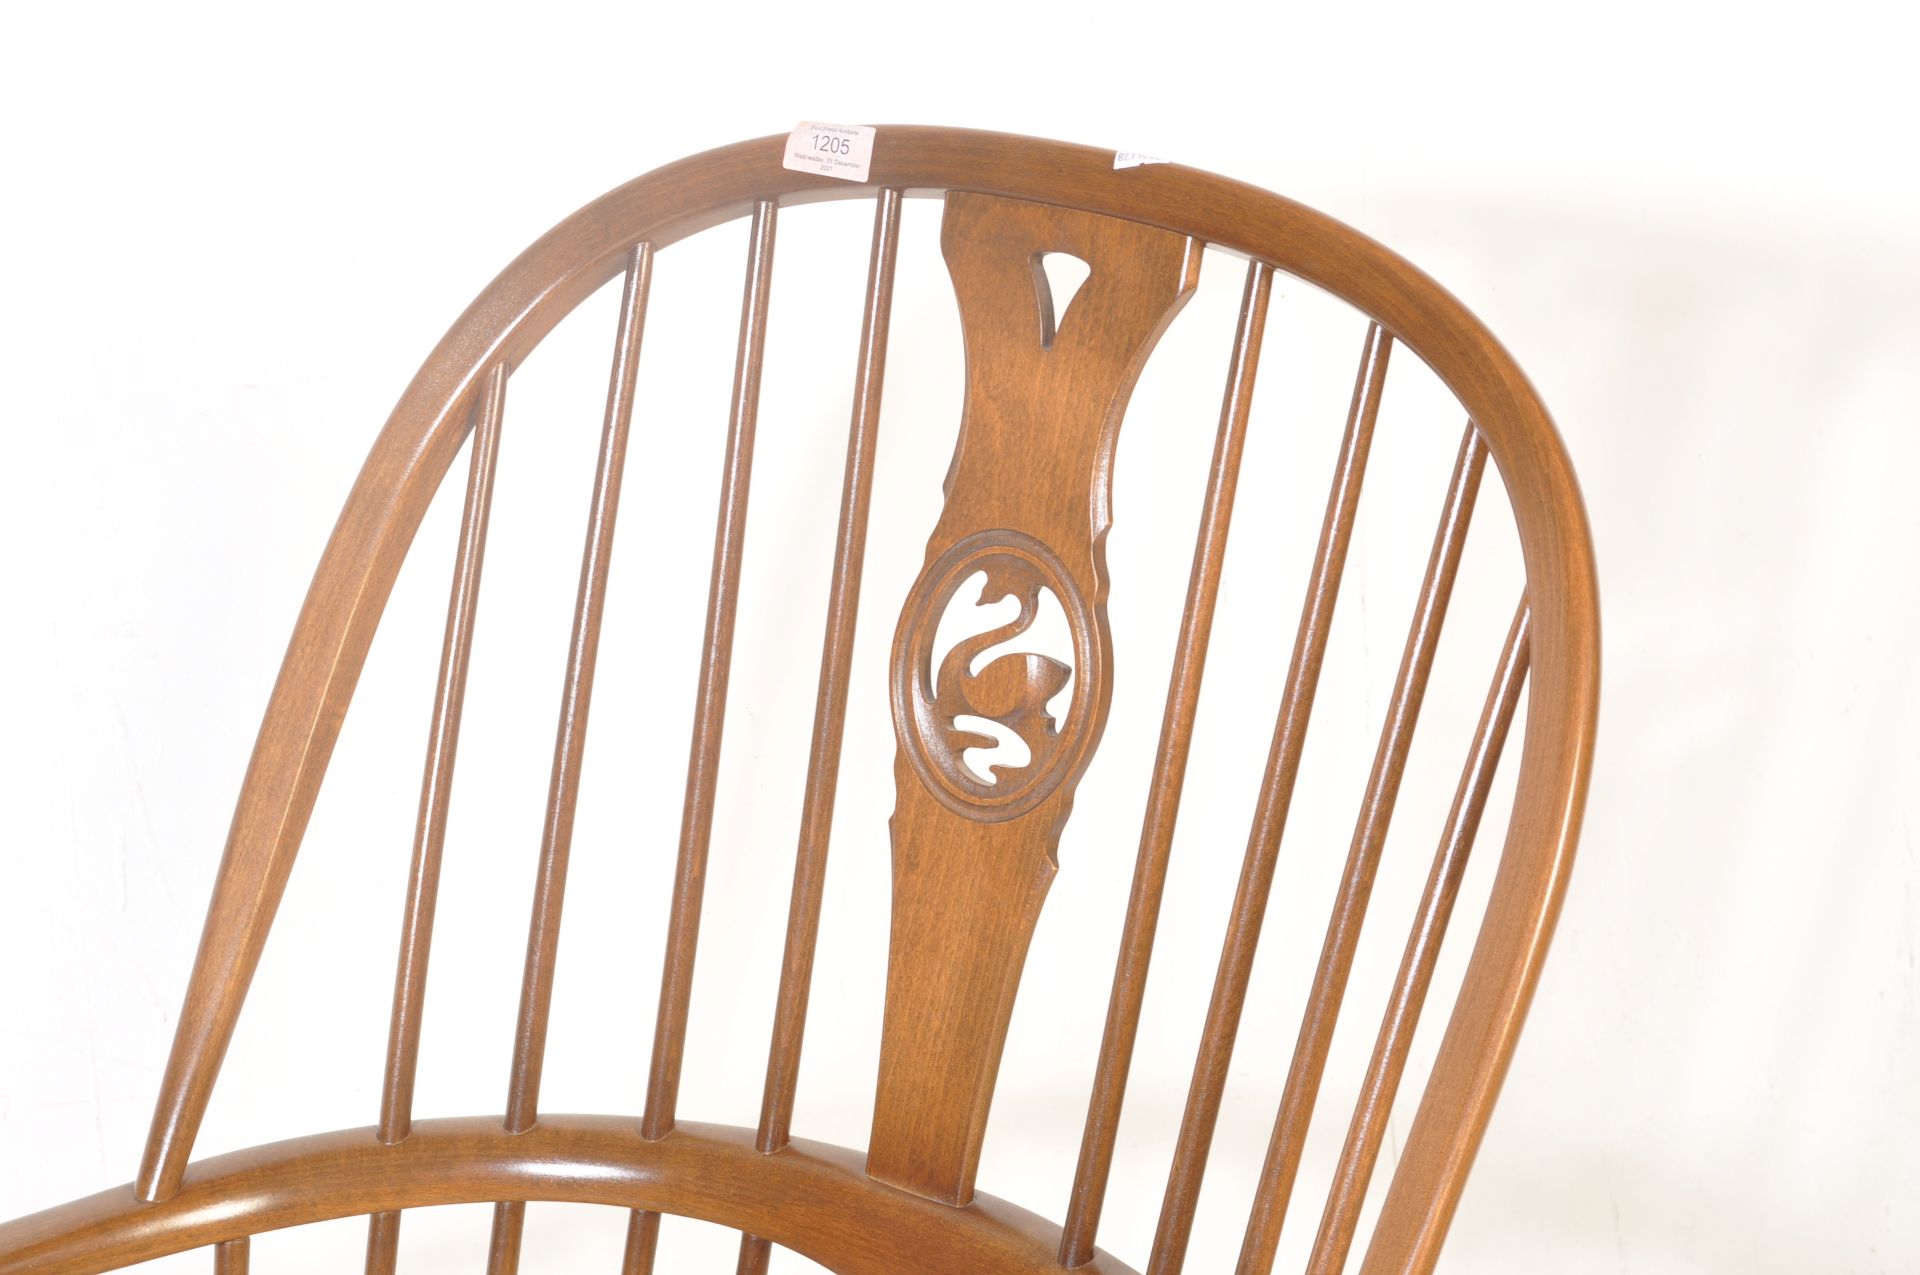 MID 20TH CENTURY ERCOL SWAN PATTERN ROCKING CHAIR - Image 4 of 5